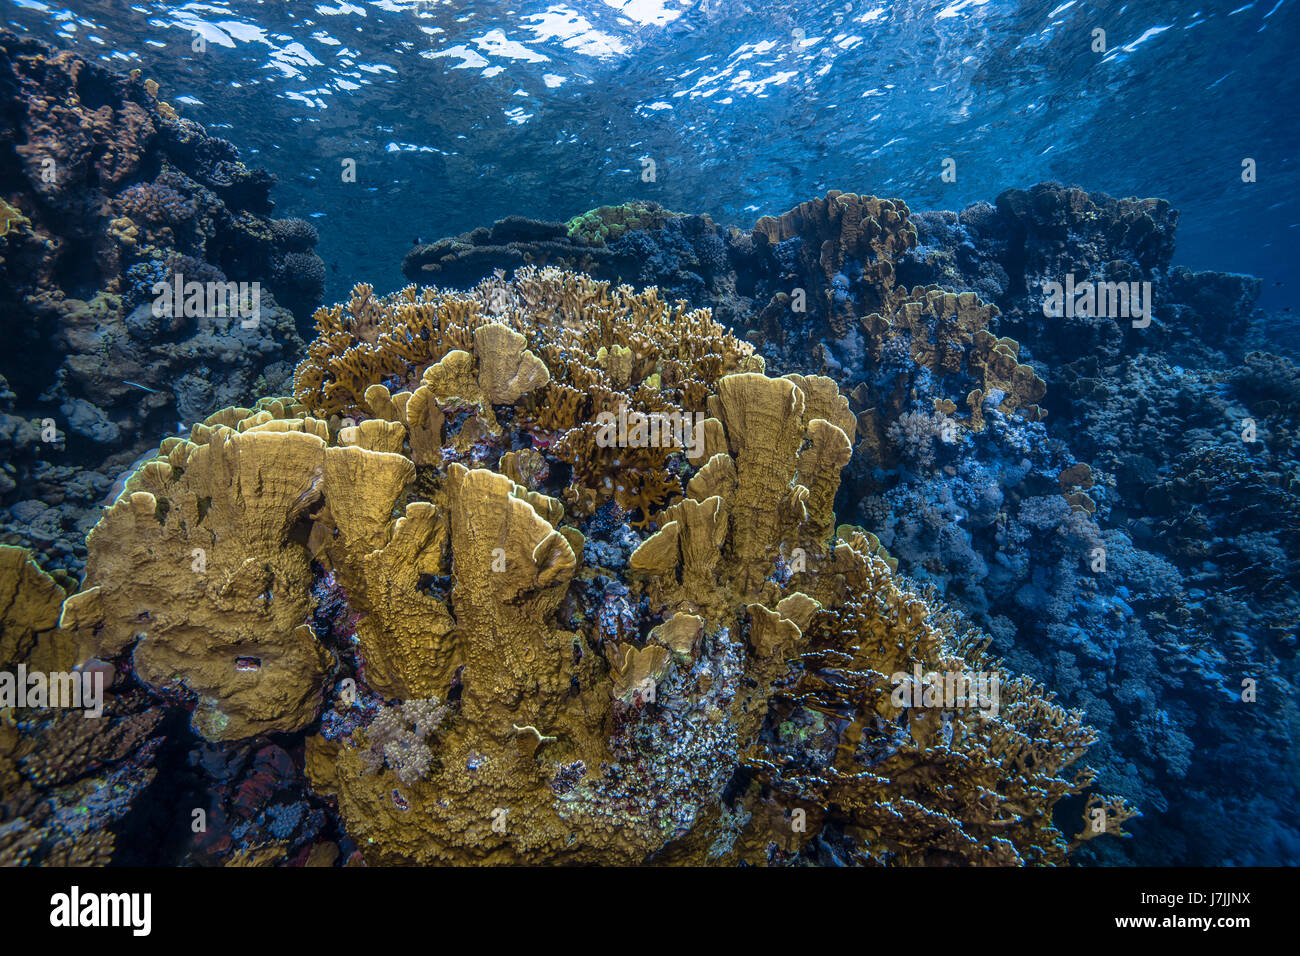 Seascape image of blade fire coral (Millepora complanata) colonies along a wall reef in the Red Sea off the coast of Southern Egypt. Stock Photo